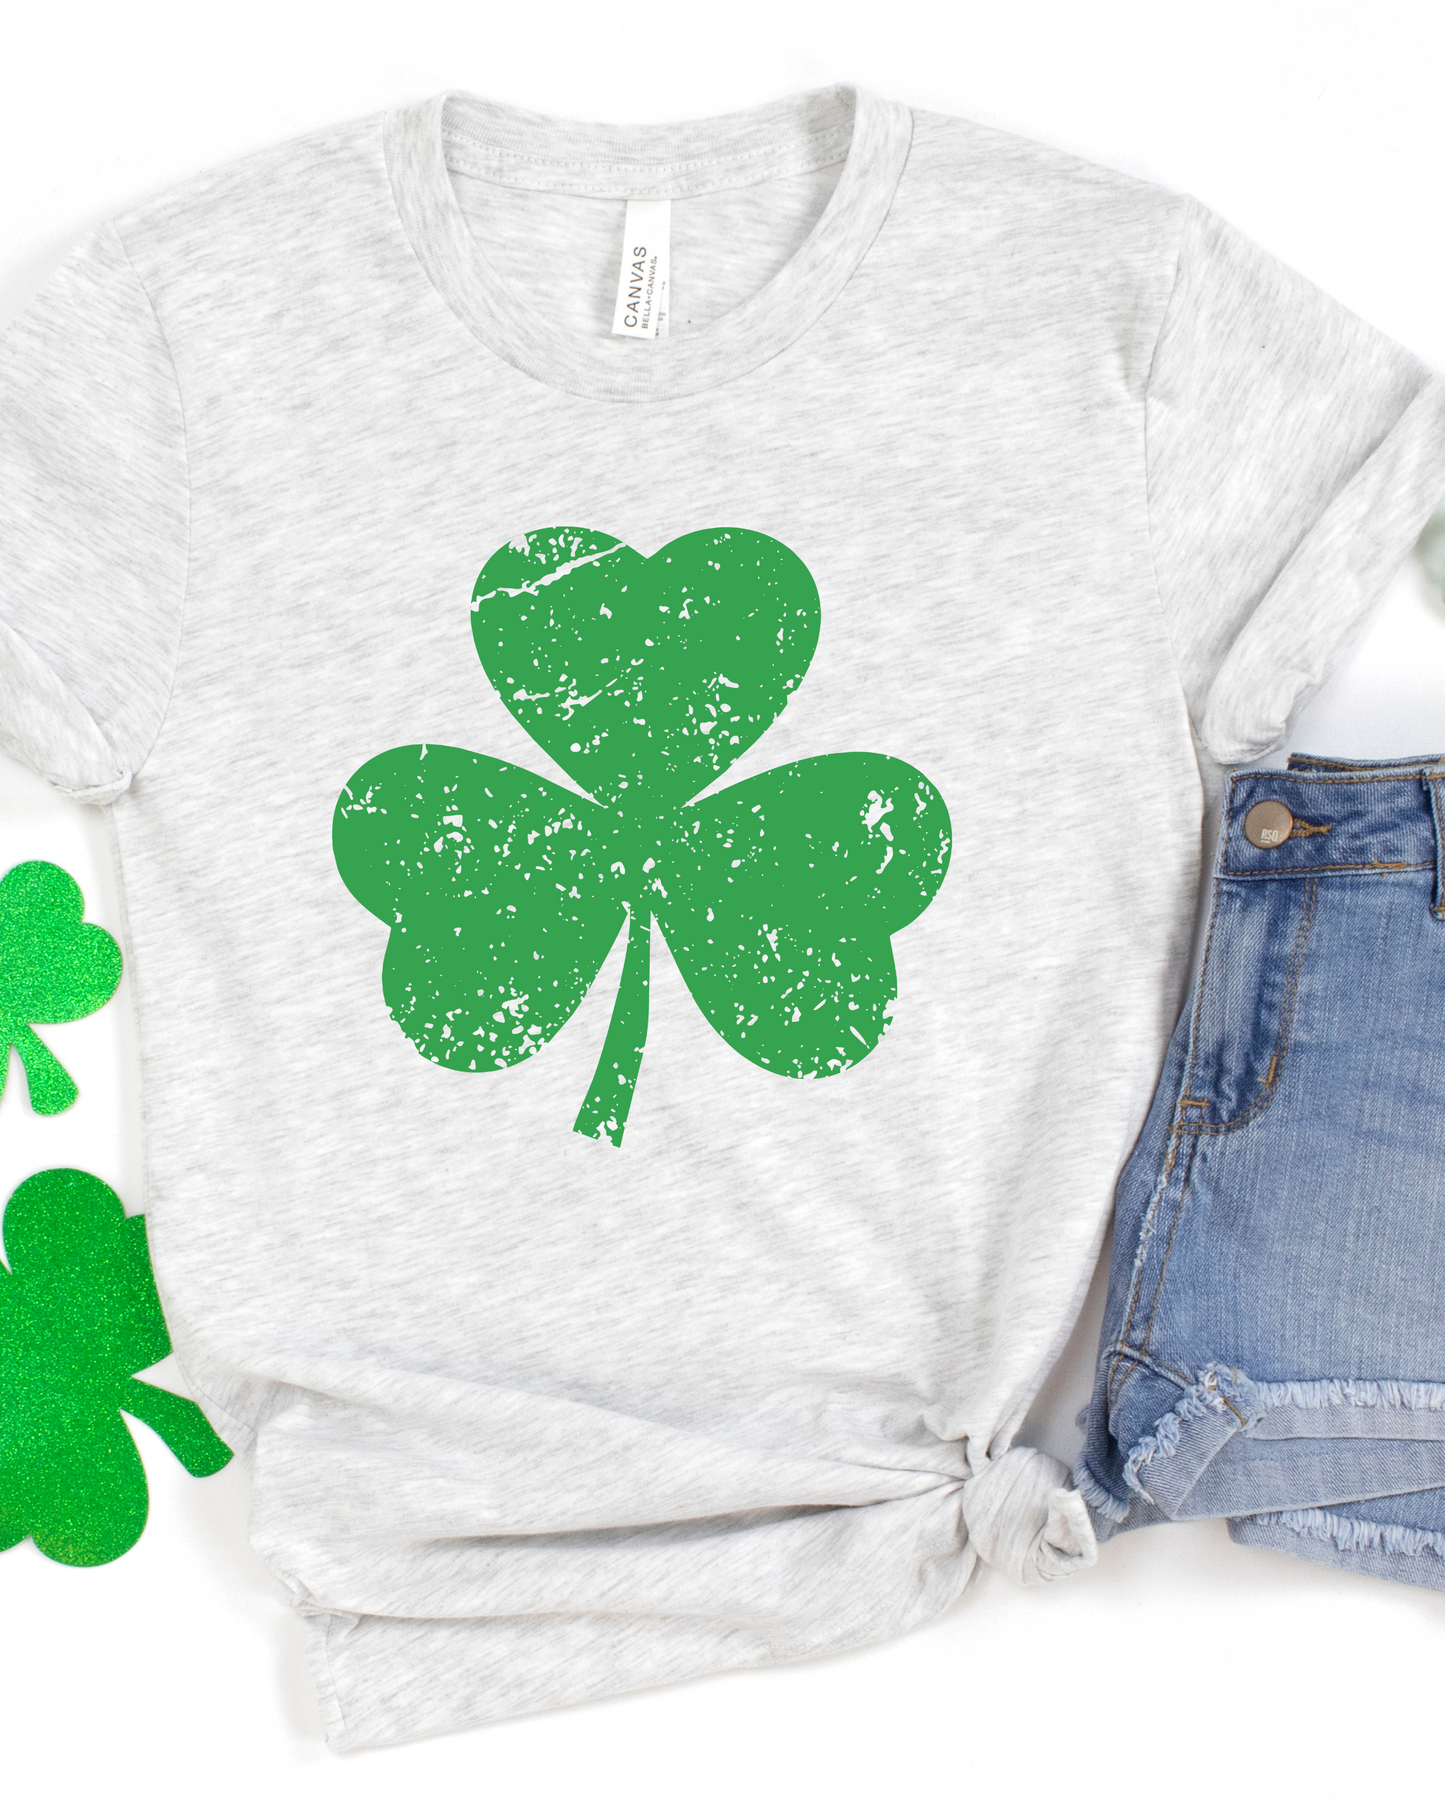 Distressed Graphic Shamrock Tee Shirt - The Magnolia Cottage Boutique